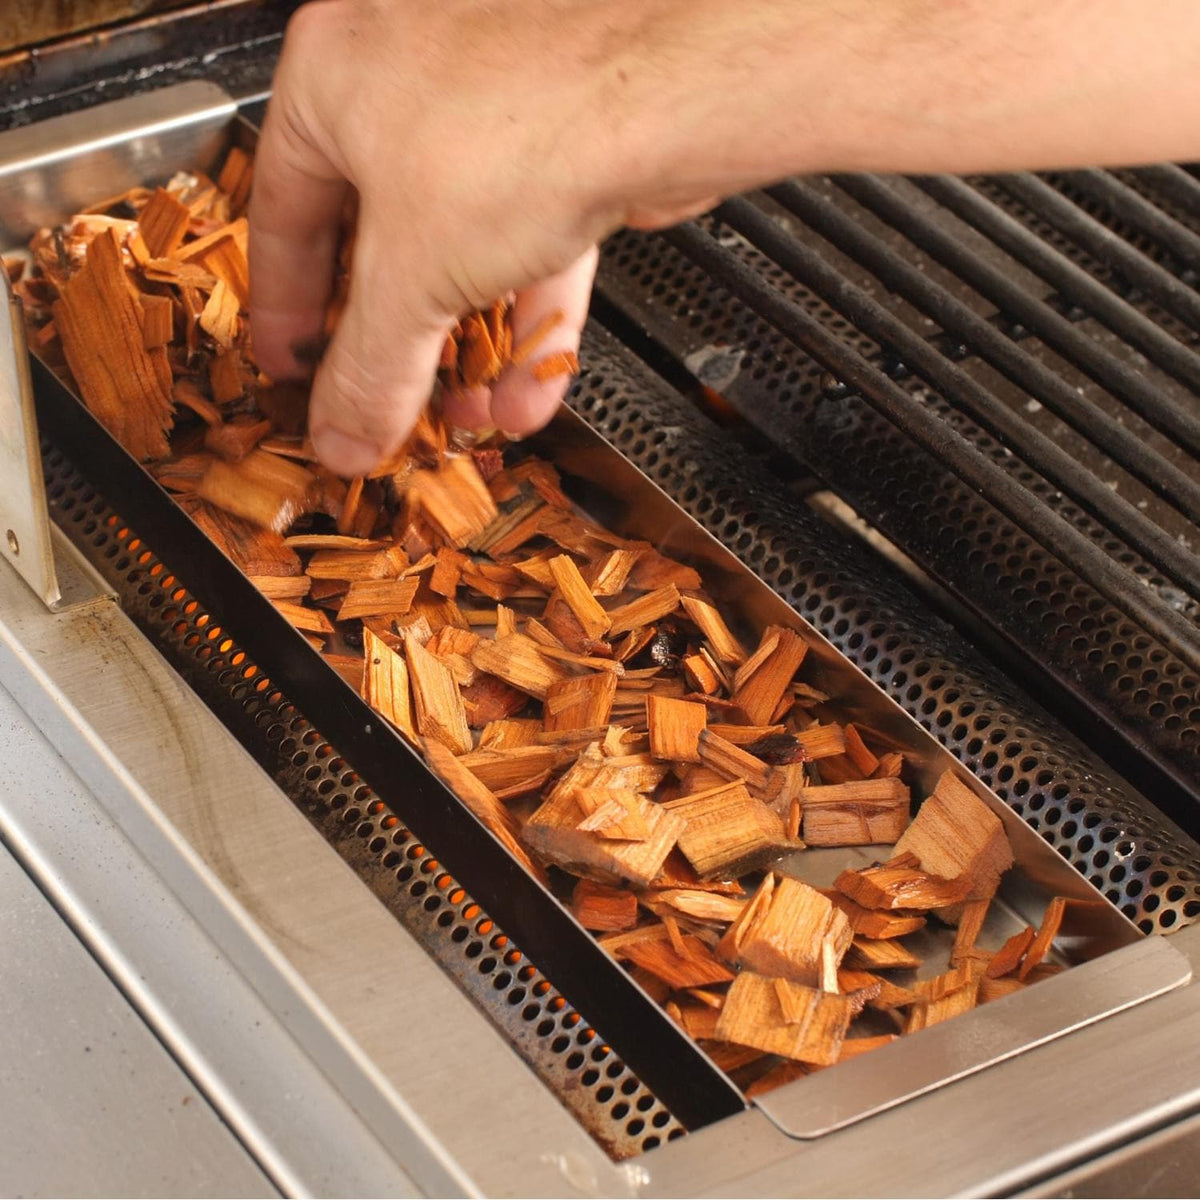 Blaze Stainless Steel Smoker Box On Grill With Wood Chips